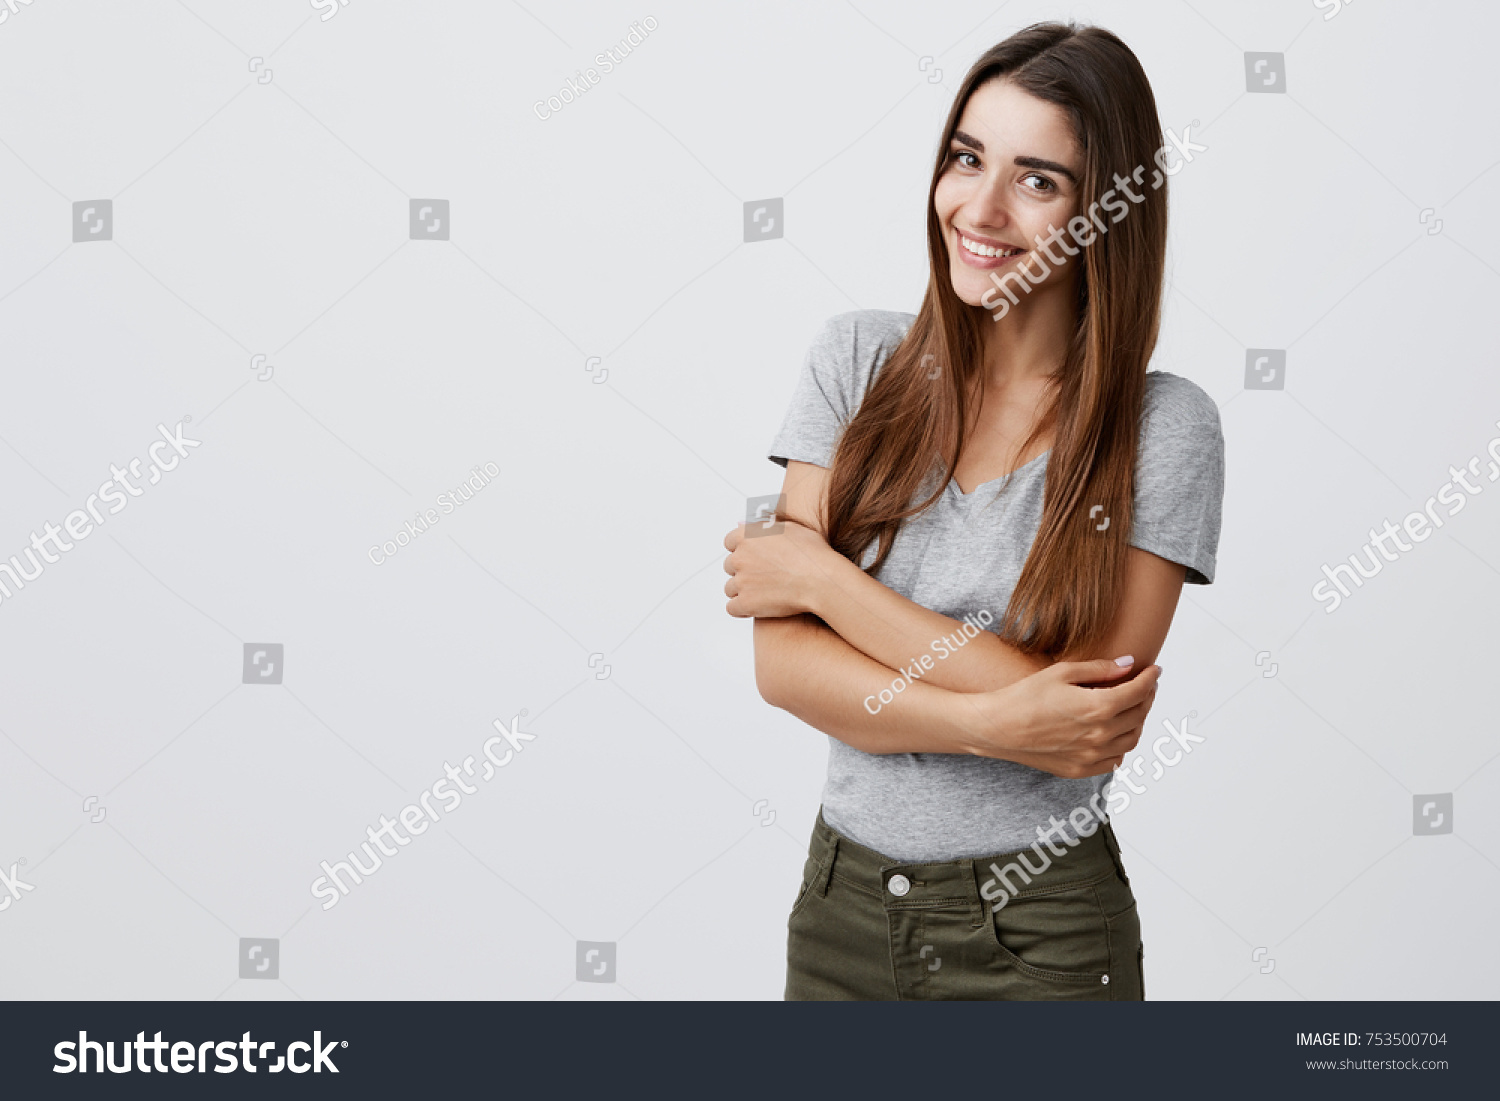 Cheerful young beautiful brunette caucasian student girl with long hair in casual outfit smiling brightly, holding hands together, posing for university graduation photo in light studio. Copy space #753500704